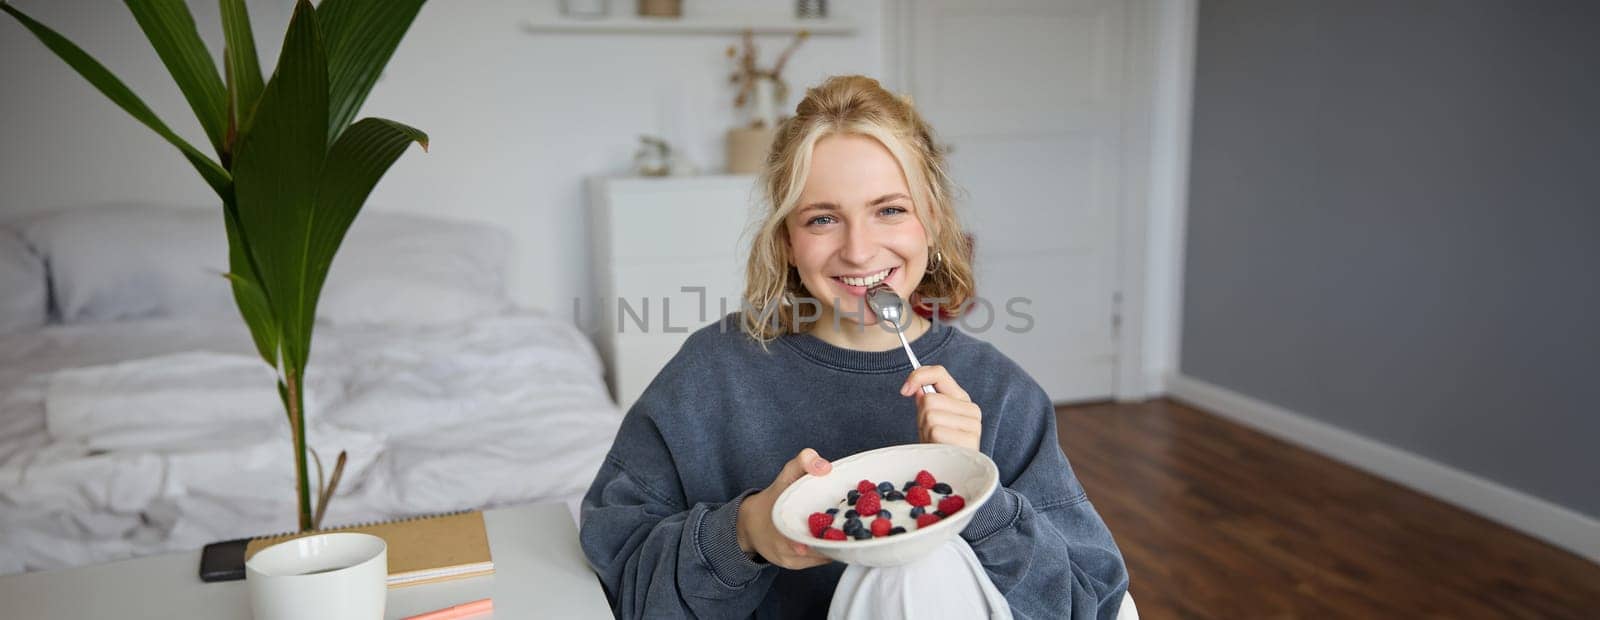 Portrait of beautiful young woman in a room, eating breakfast, holding bowl with dessert and a spoon, smiling at camera, recording lifestyle vlog by Benzoix